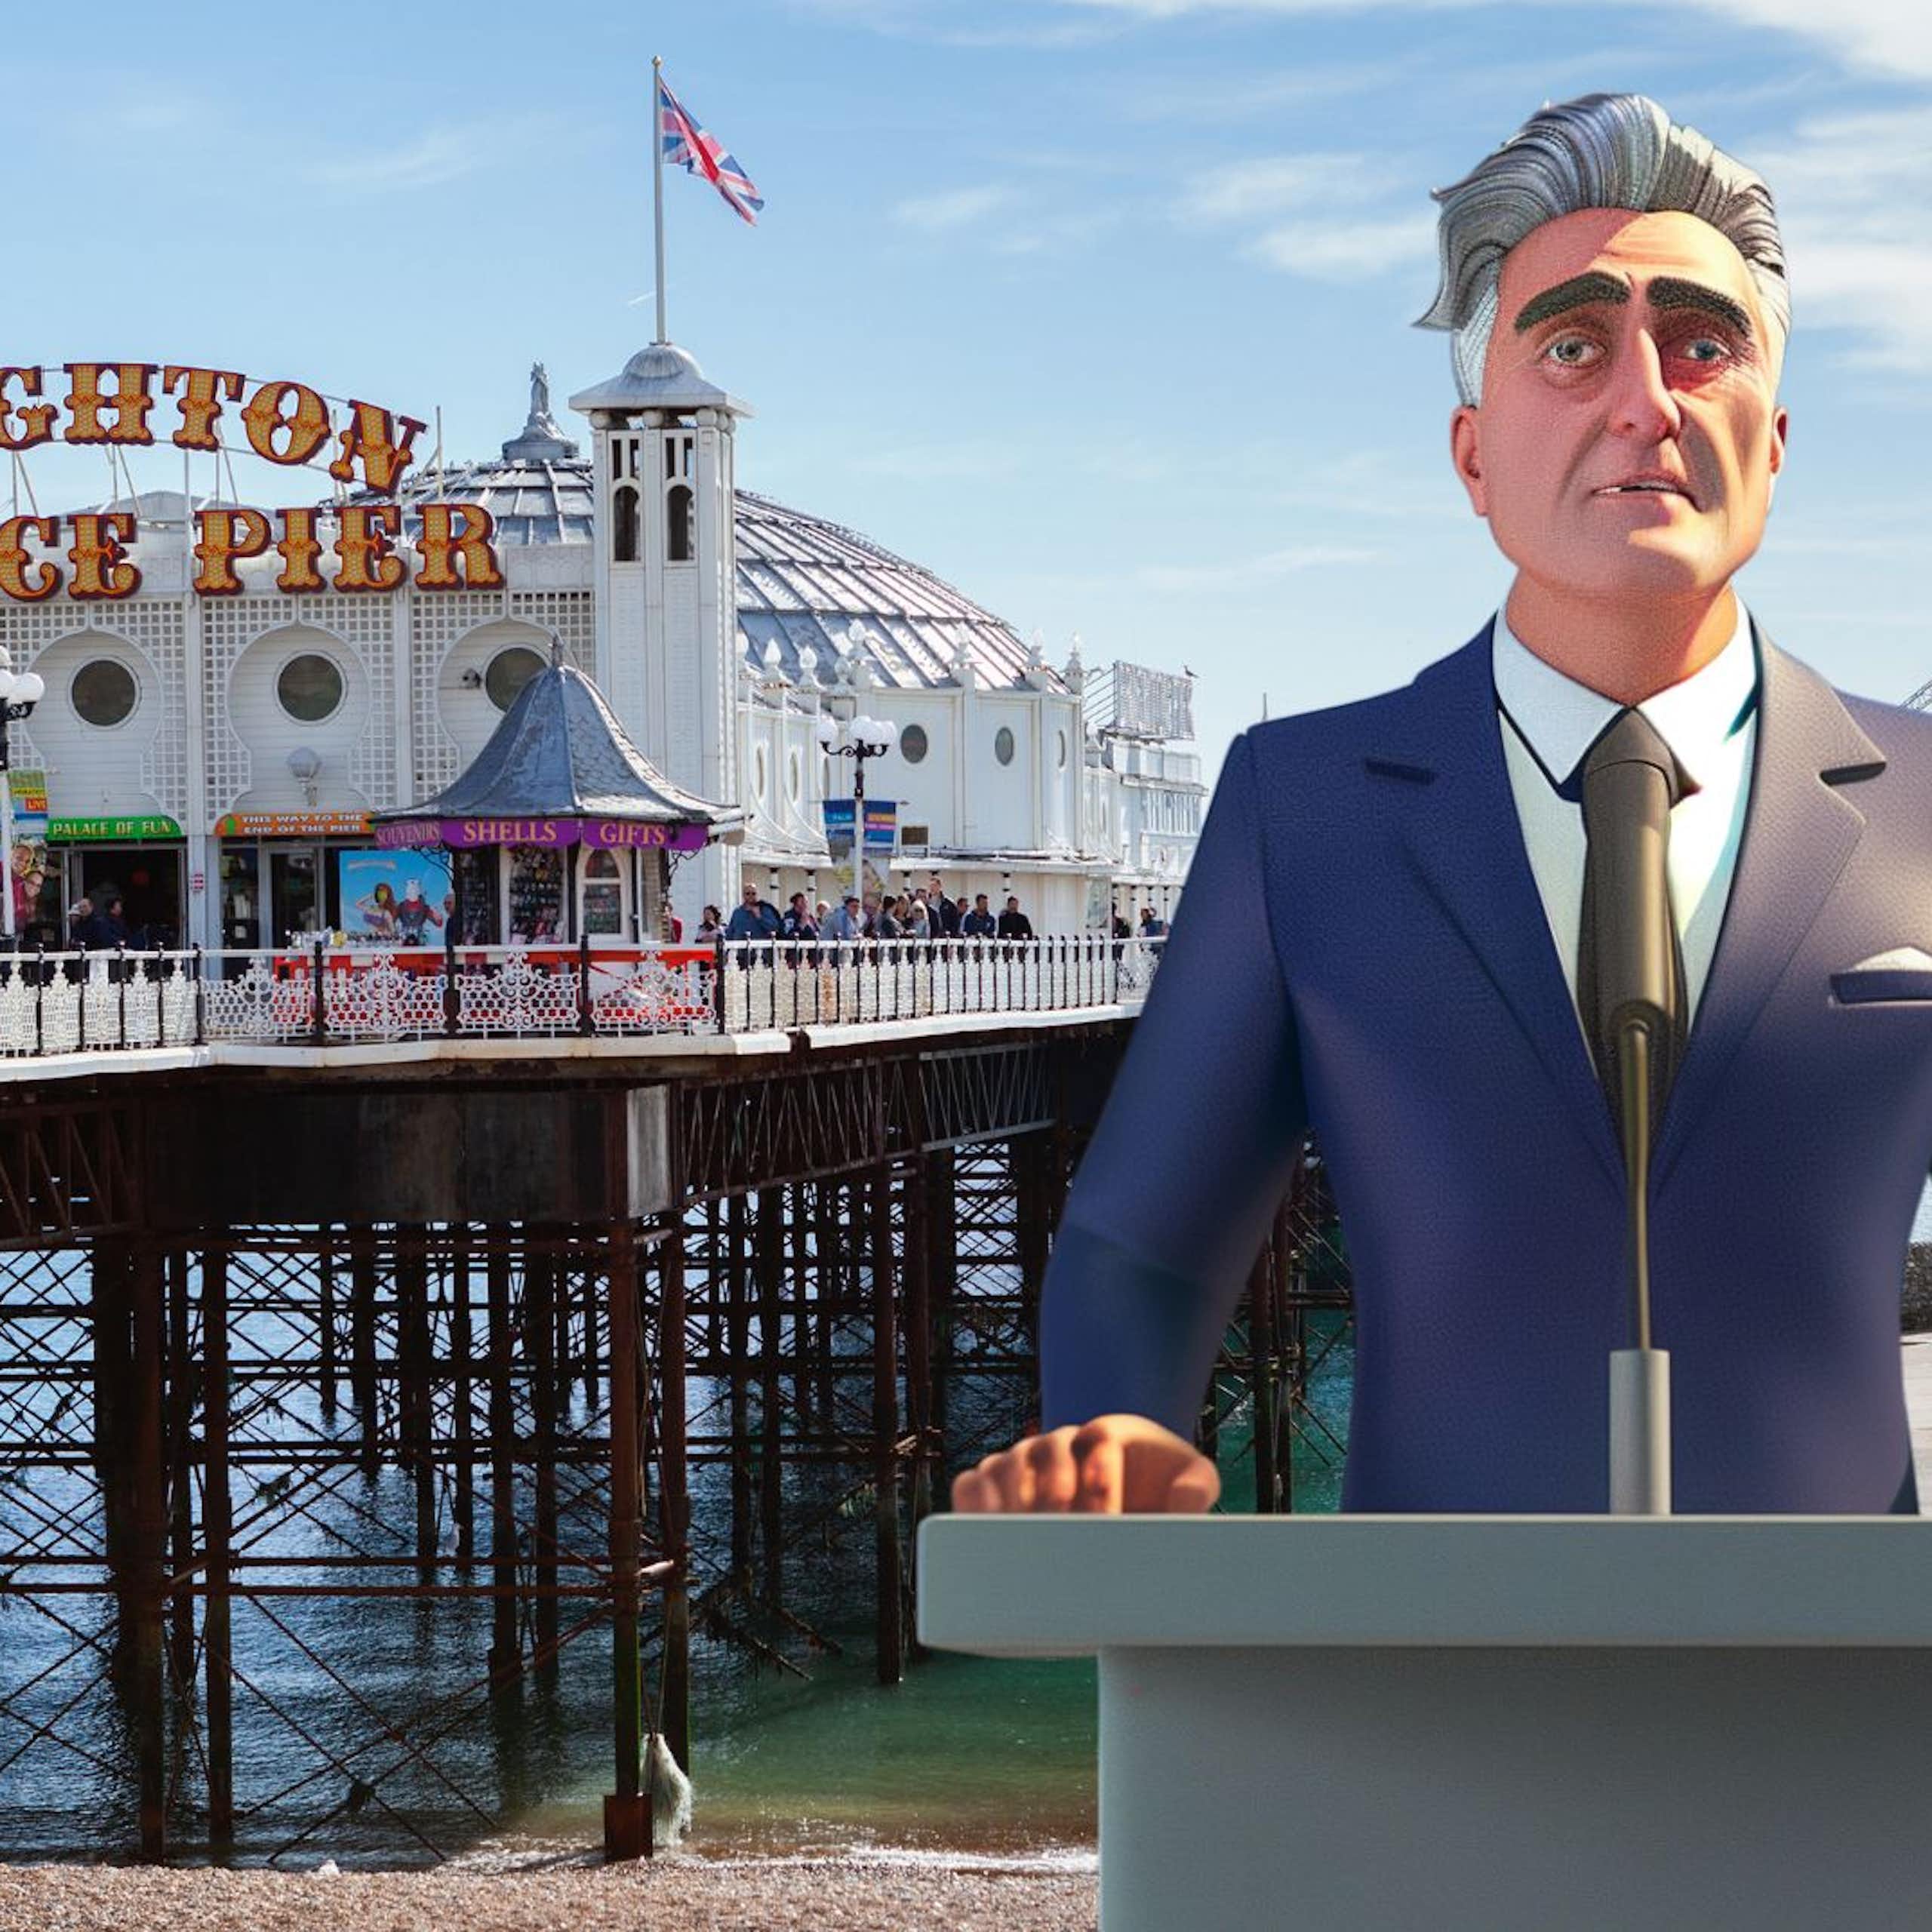 AI Steve at at a podium in front of Brighton Pier.